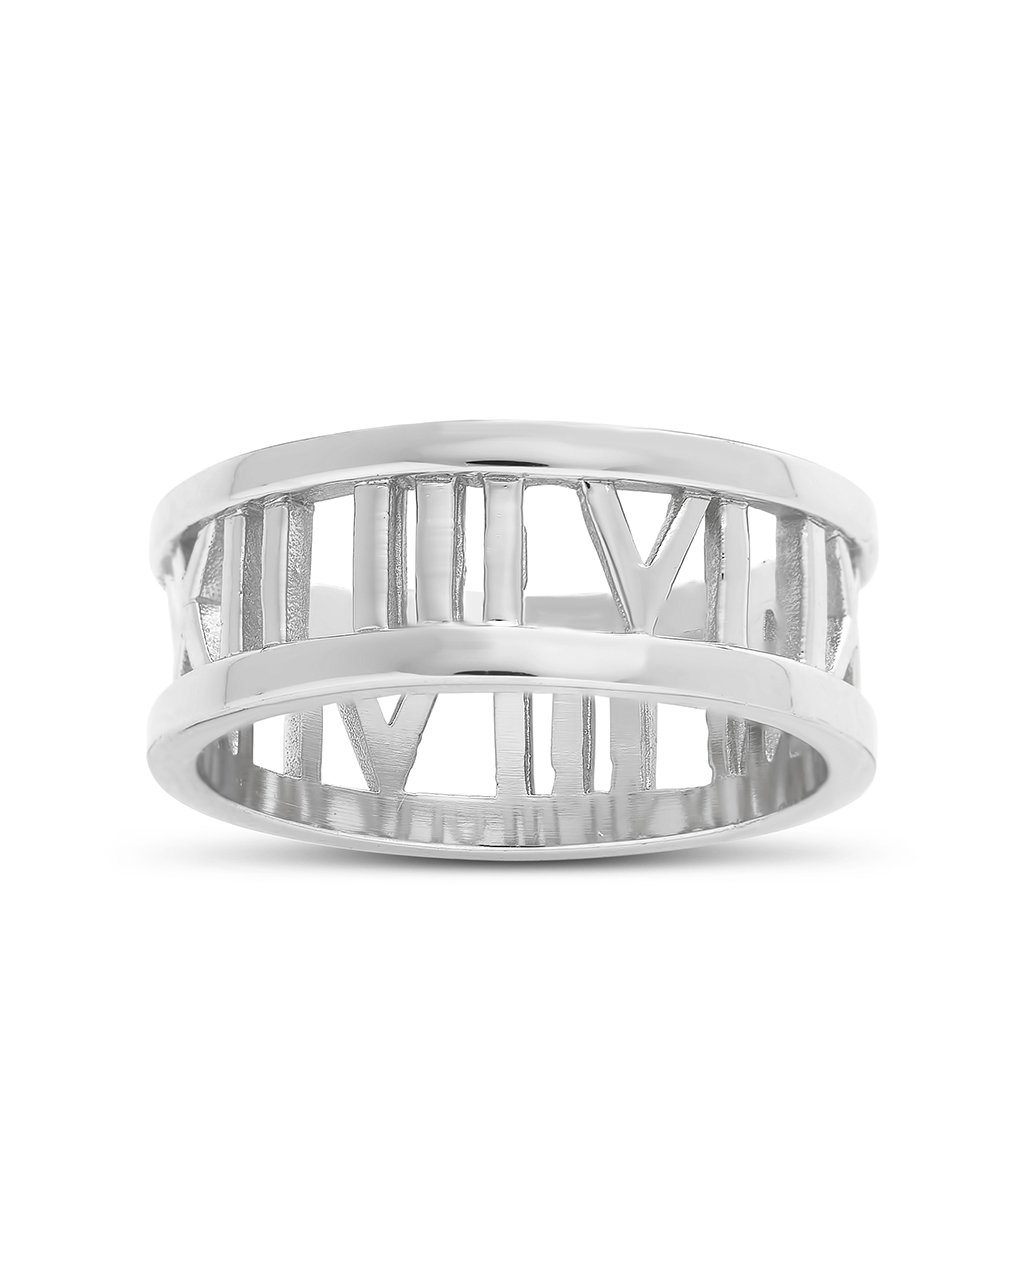  Men's Roman Numeral Eternity Cute Ring New 925 Sterling Silver  Band Size 4 : Clothing, Shoes & Jewelry